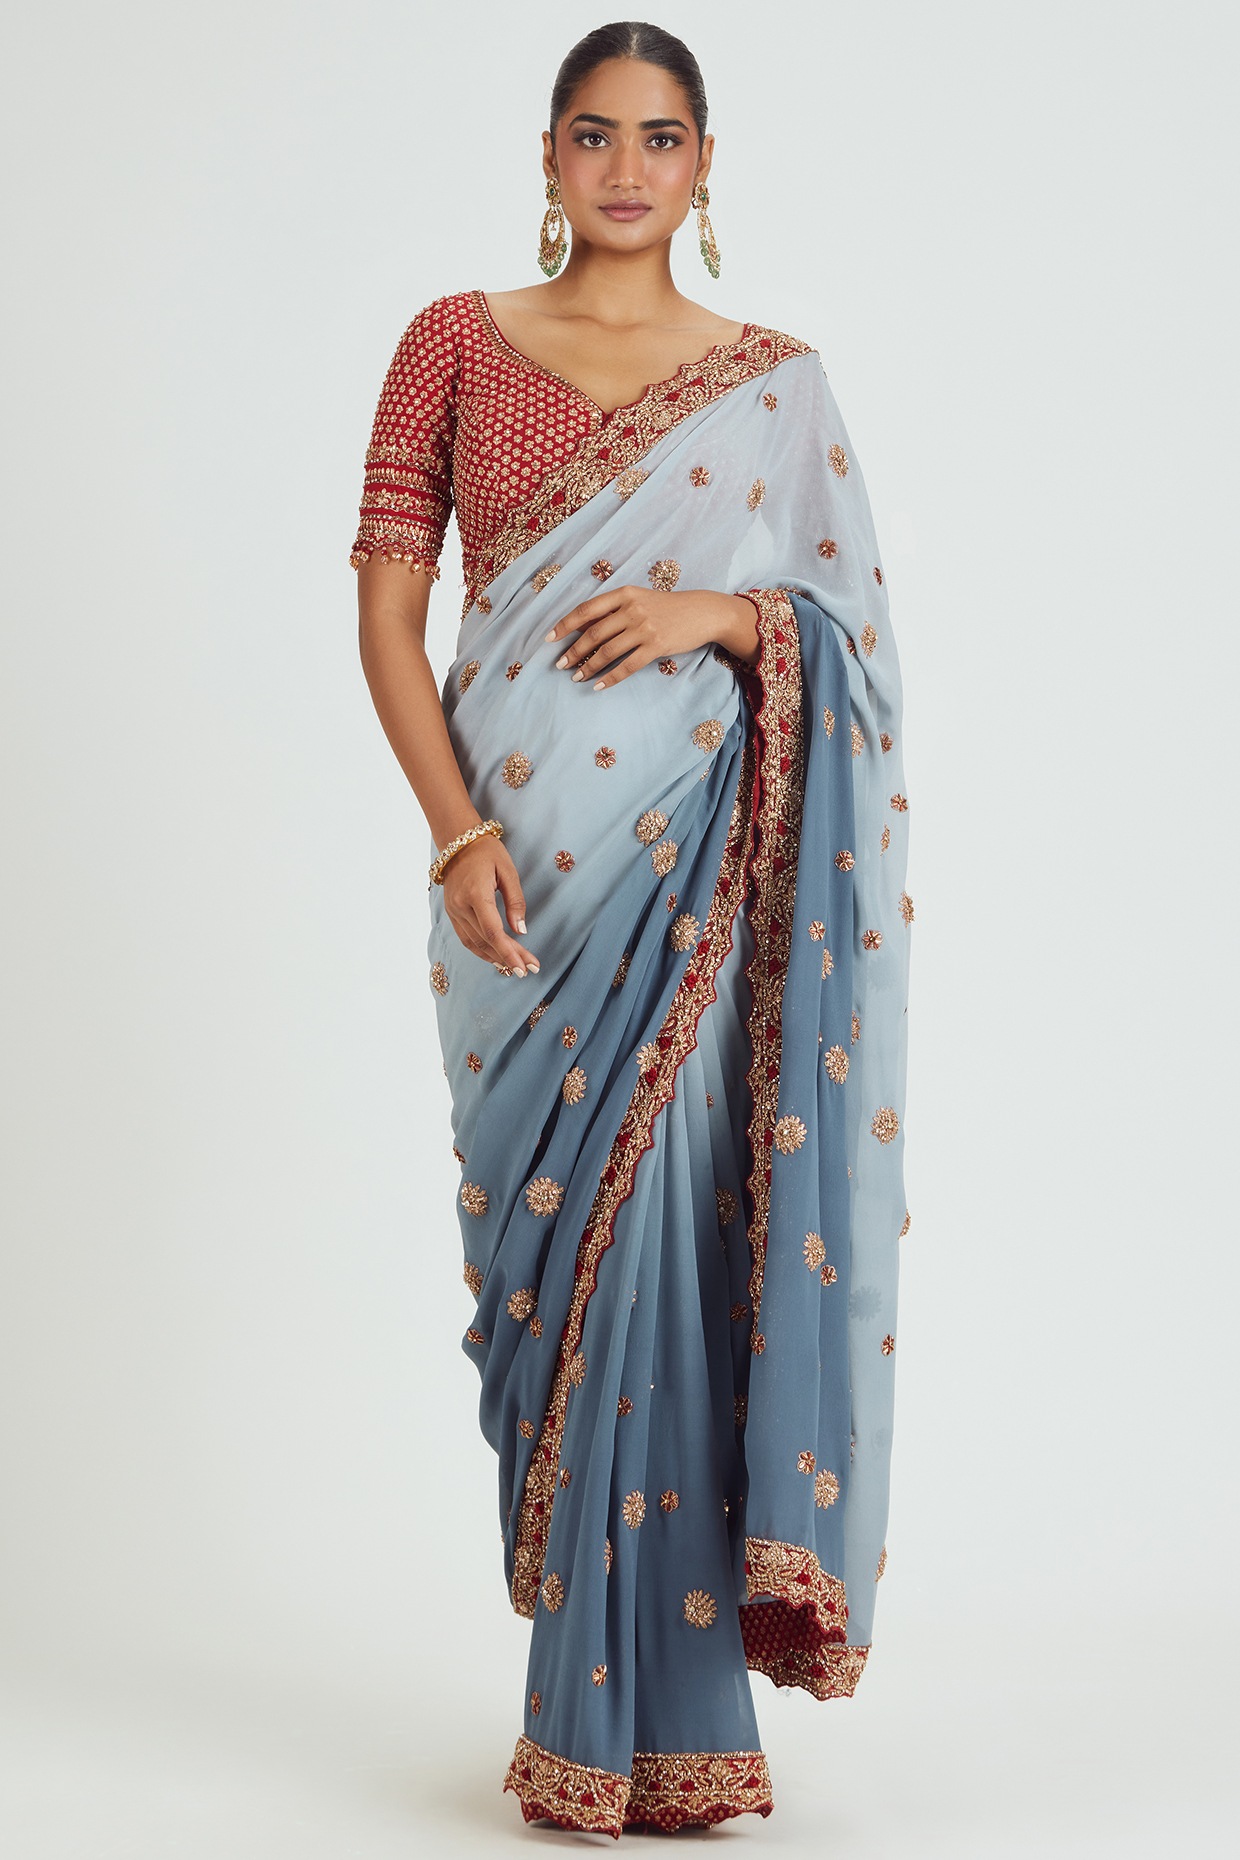 Bridesmaids Sarees, Mother of the Bride & Mother of the Groom Sarees